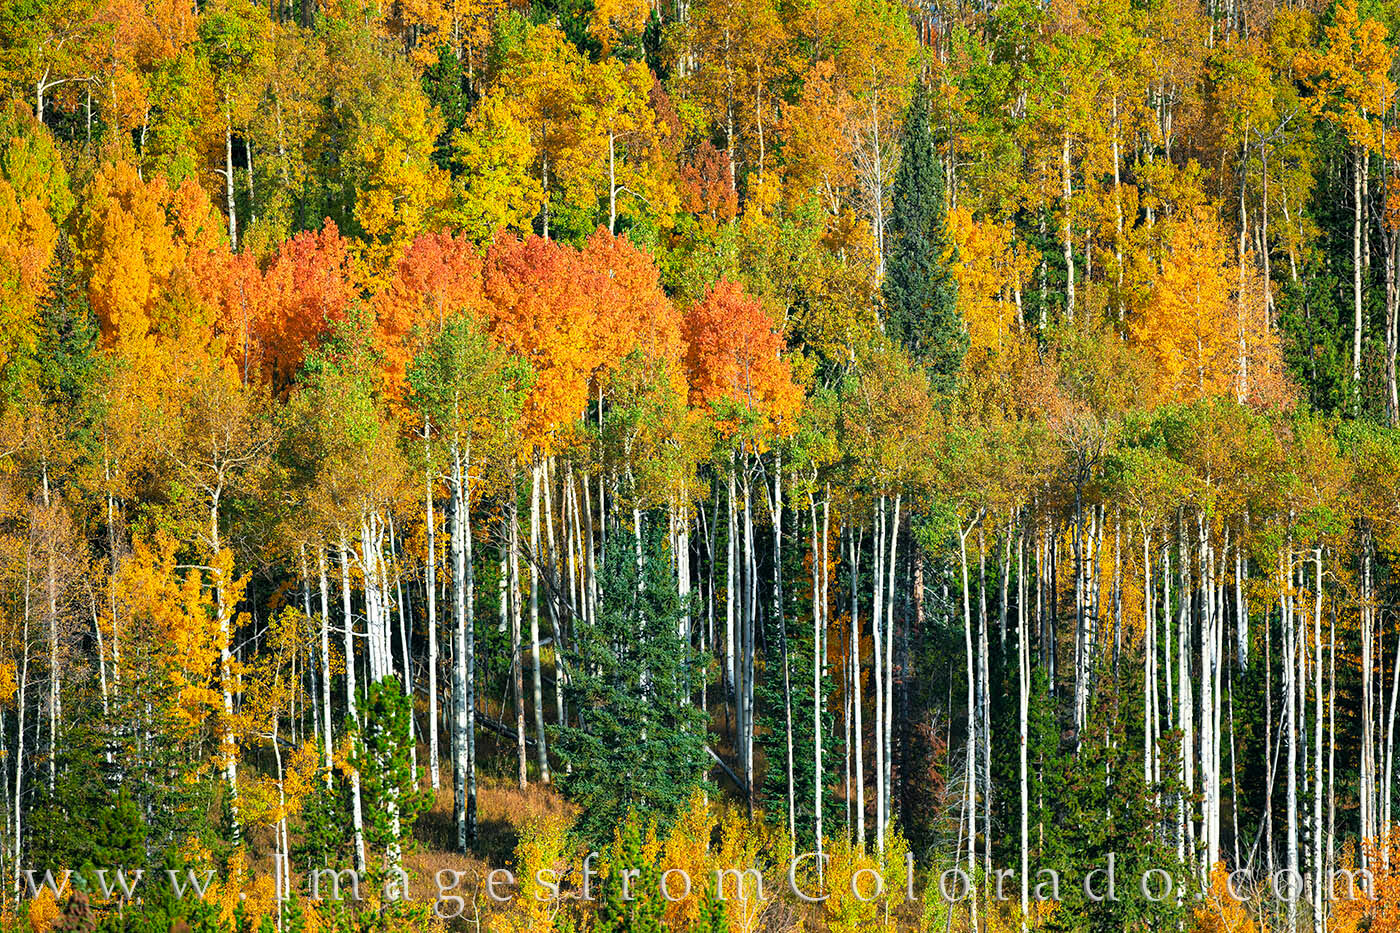 Vibrant fall colors make their appearance in Winter Park, Colorado. Taken on a cold late September morning, the aspen showed...